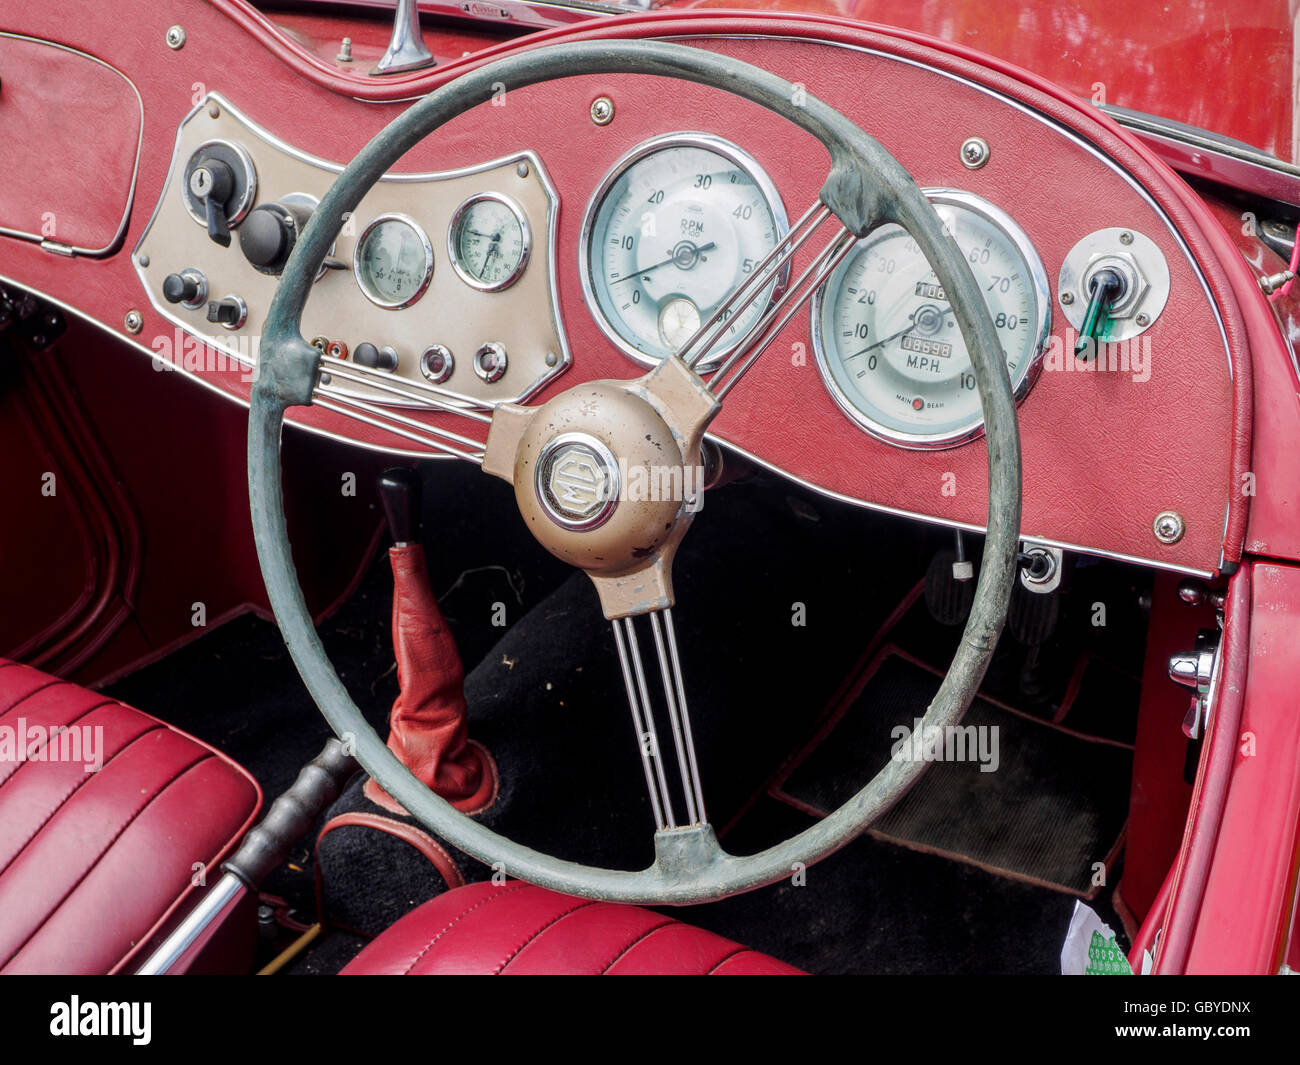 Steering wheel and dashboard of an MG TD sports car from the early